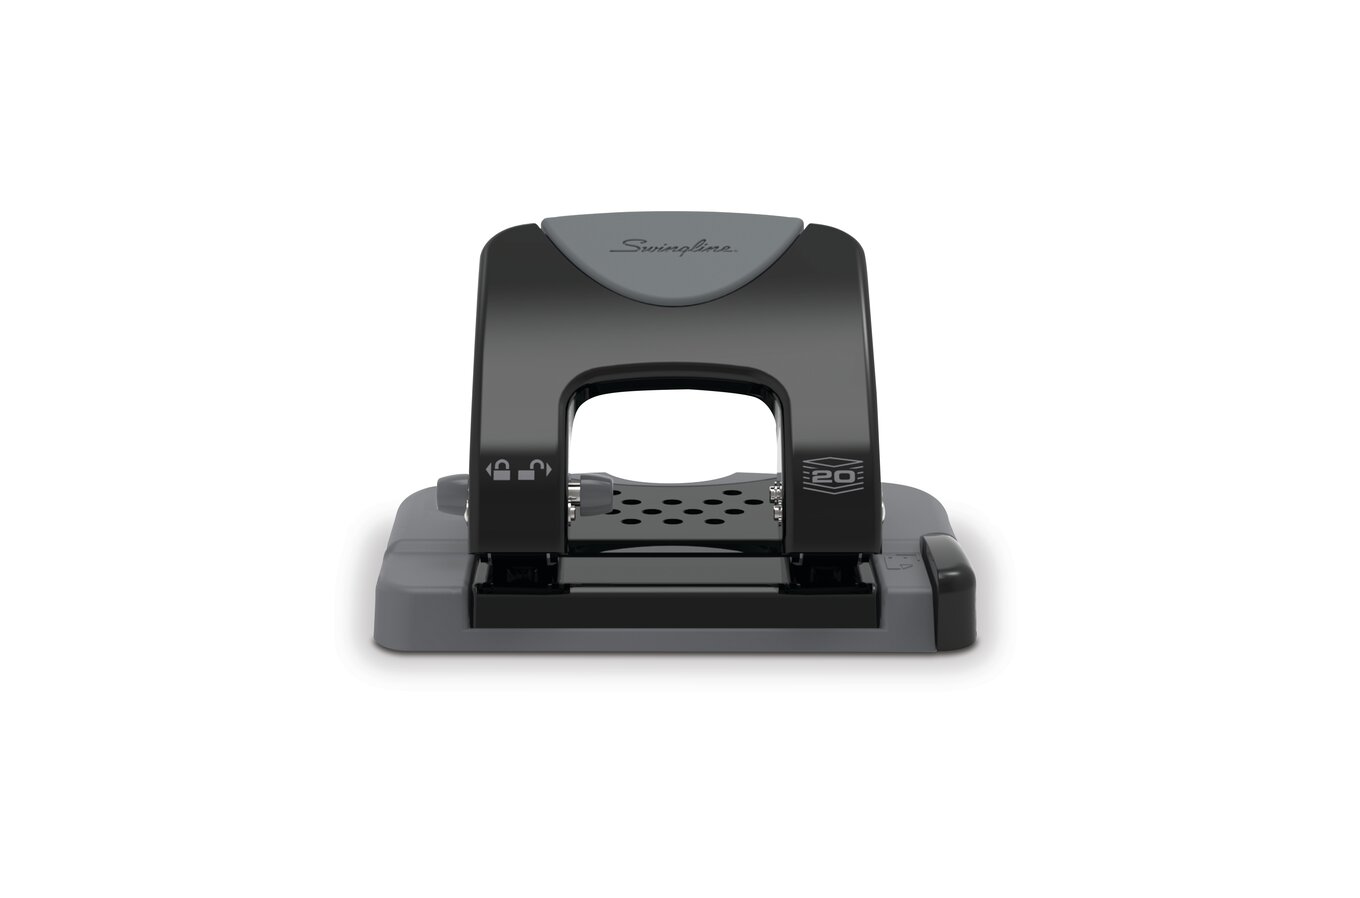 Swingline® LightTouch® High Capacity Desktop Punch, 2-7 Holes, 20 Sheets, Swingline Manual Punches - Desktop Hole Punches